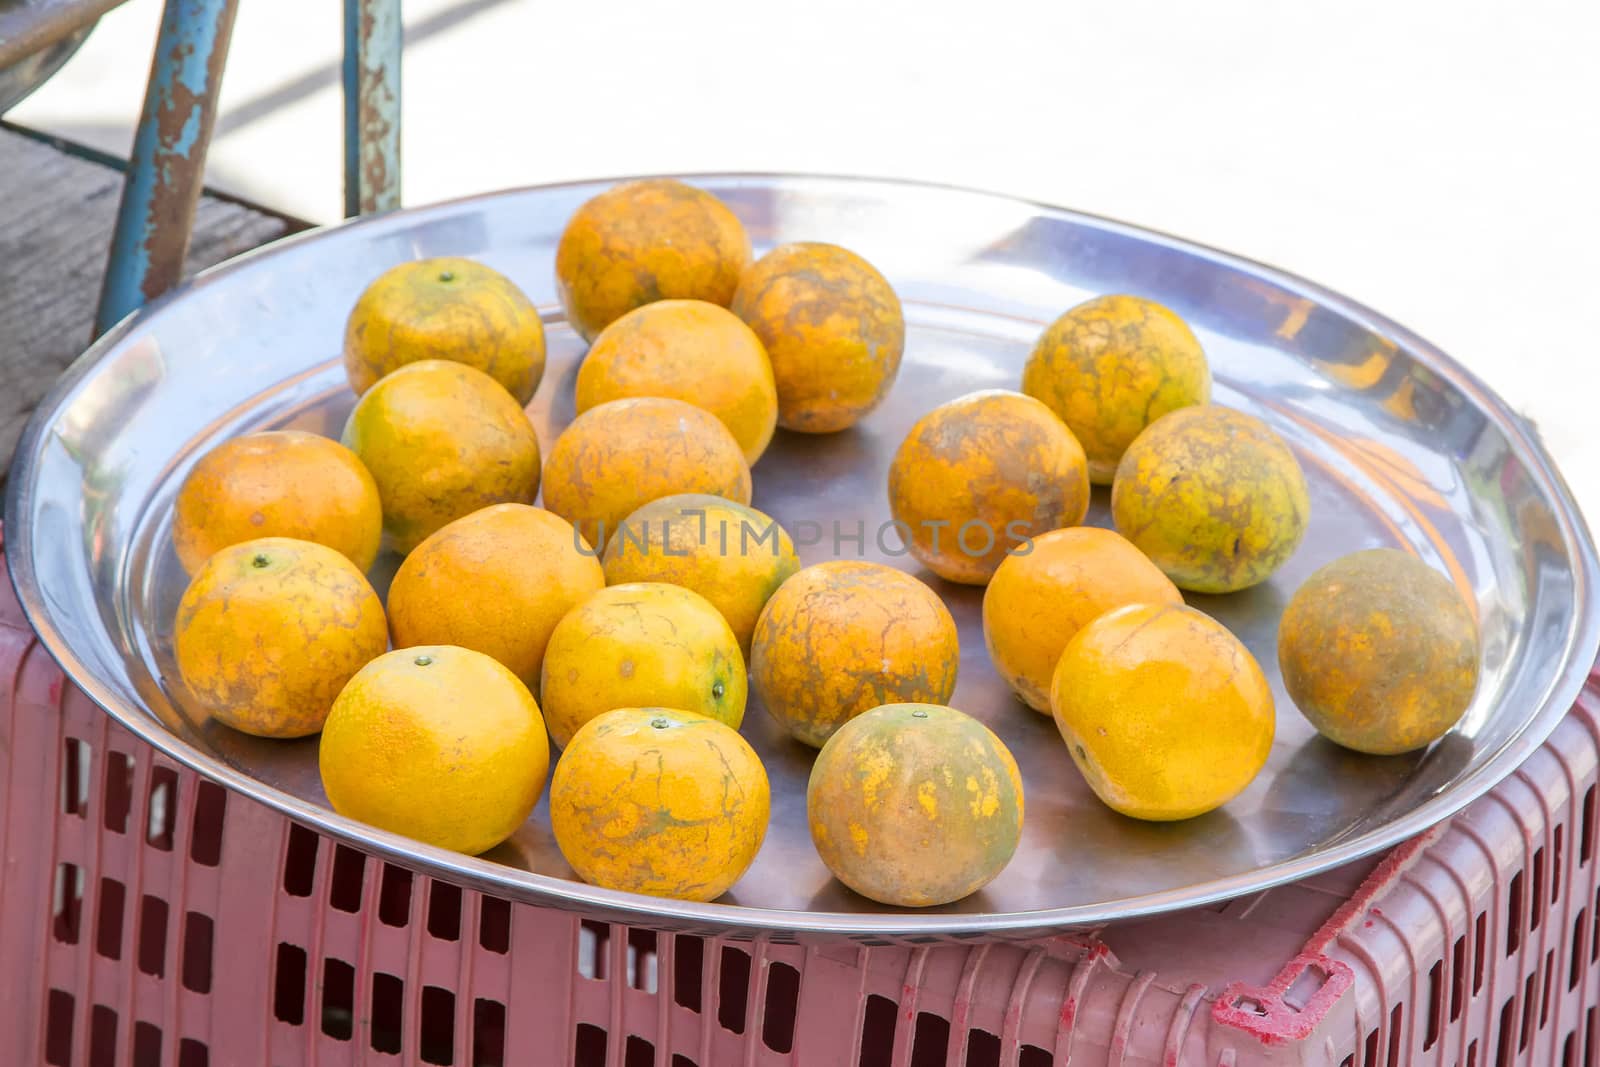 Orange in the tray stainless steel on street food